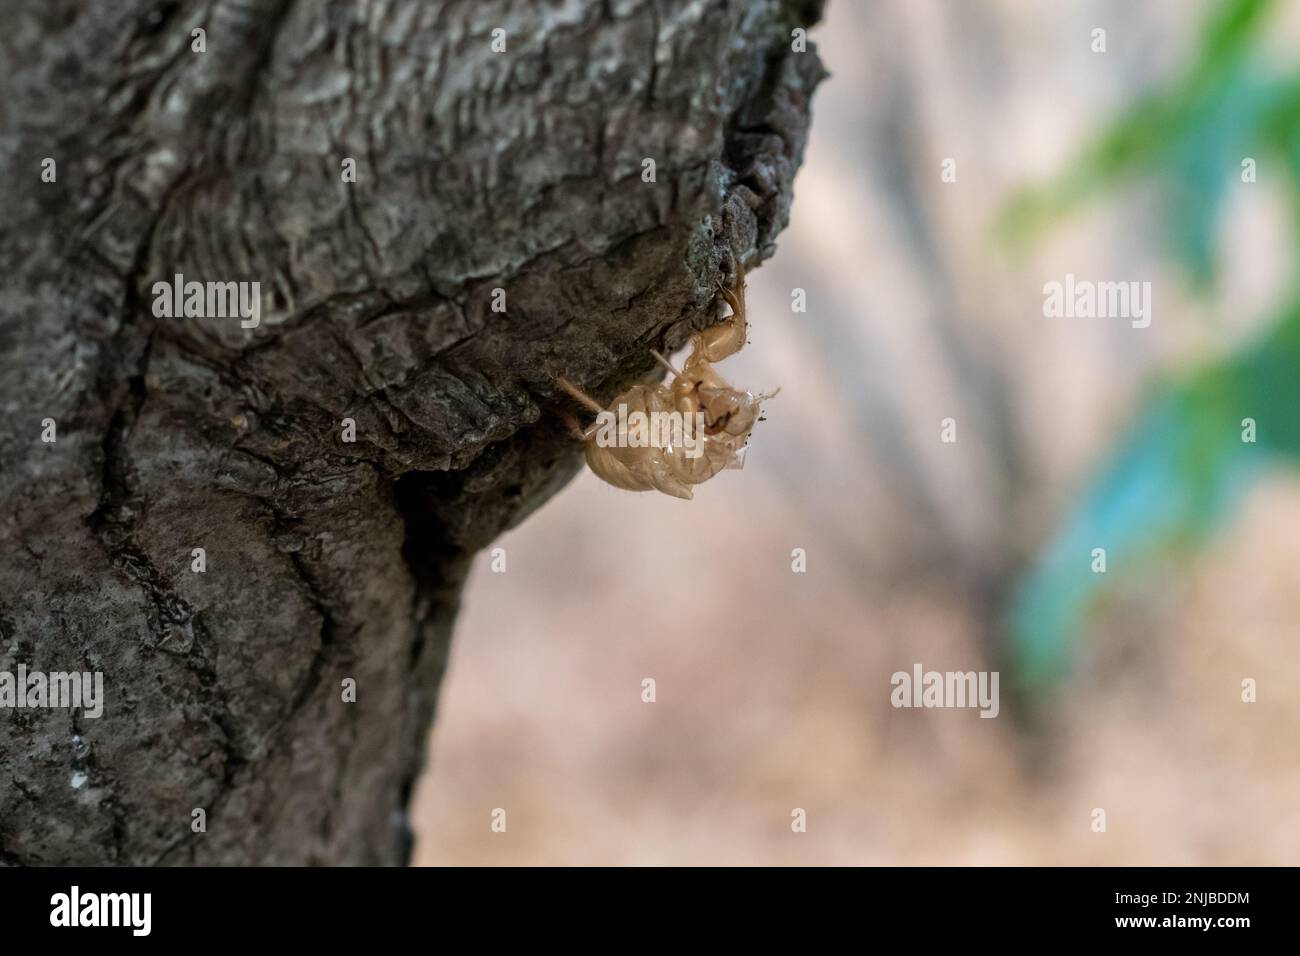 Cicada nymph shell on a tree trunk Stock Photo